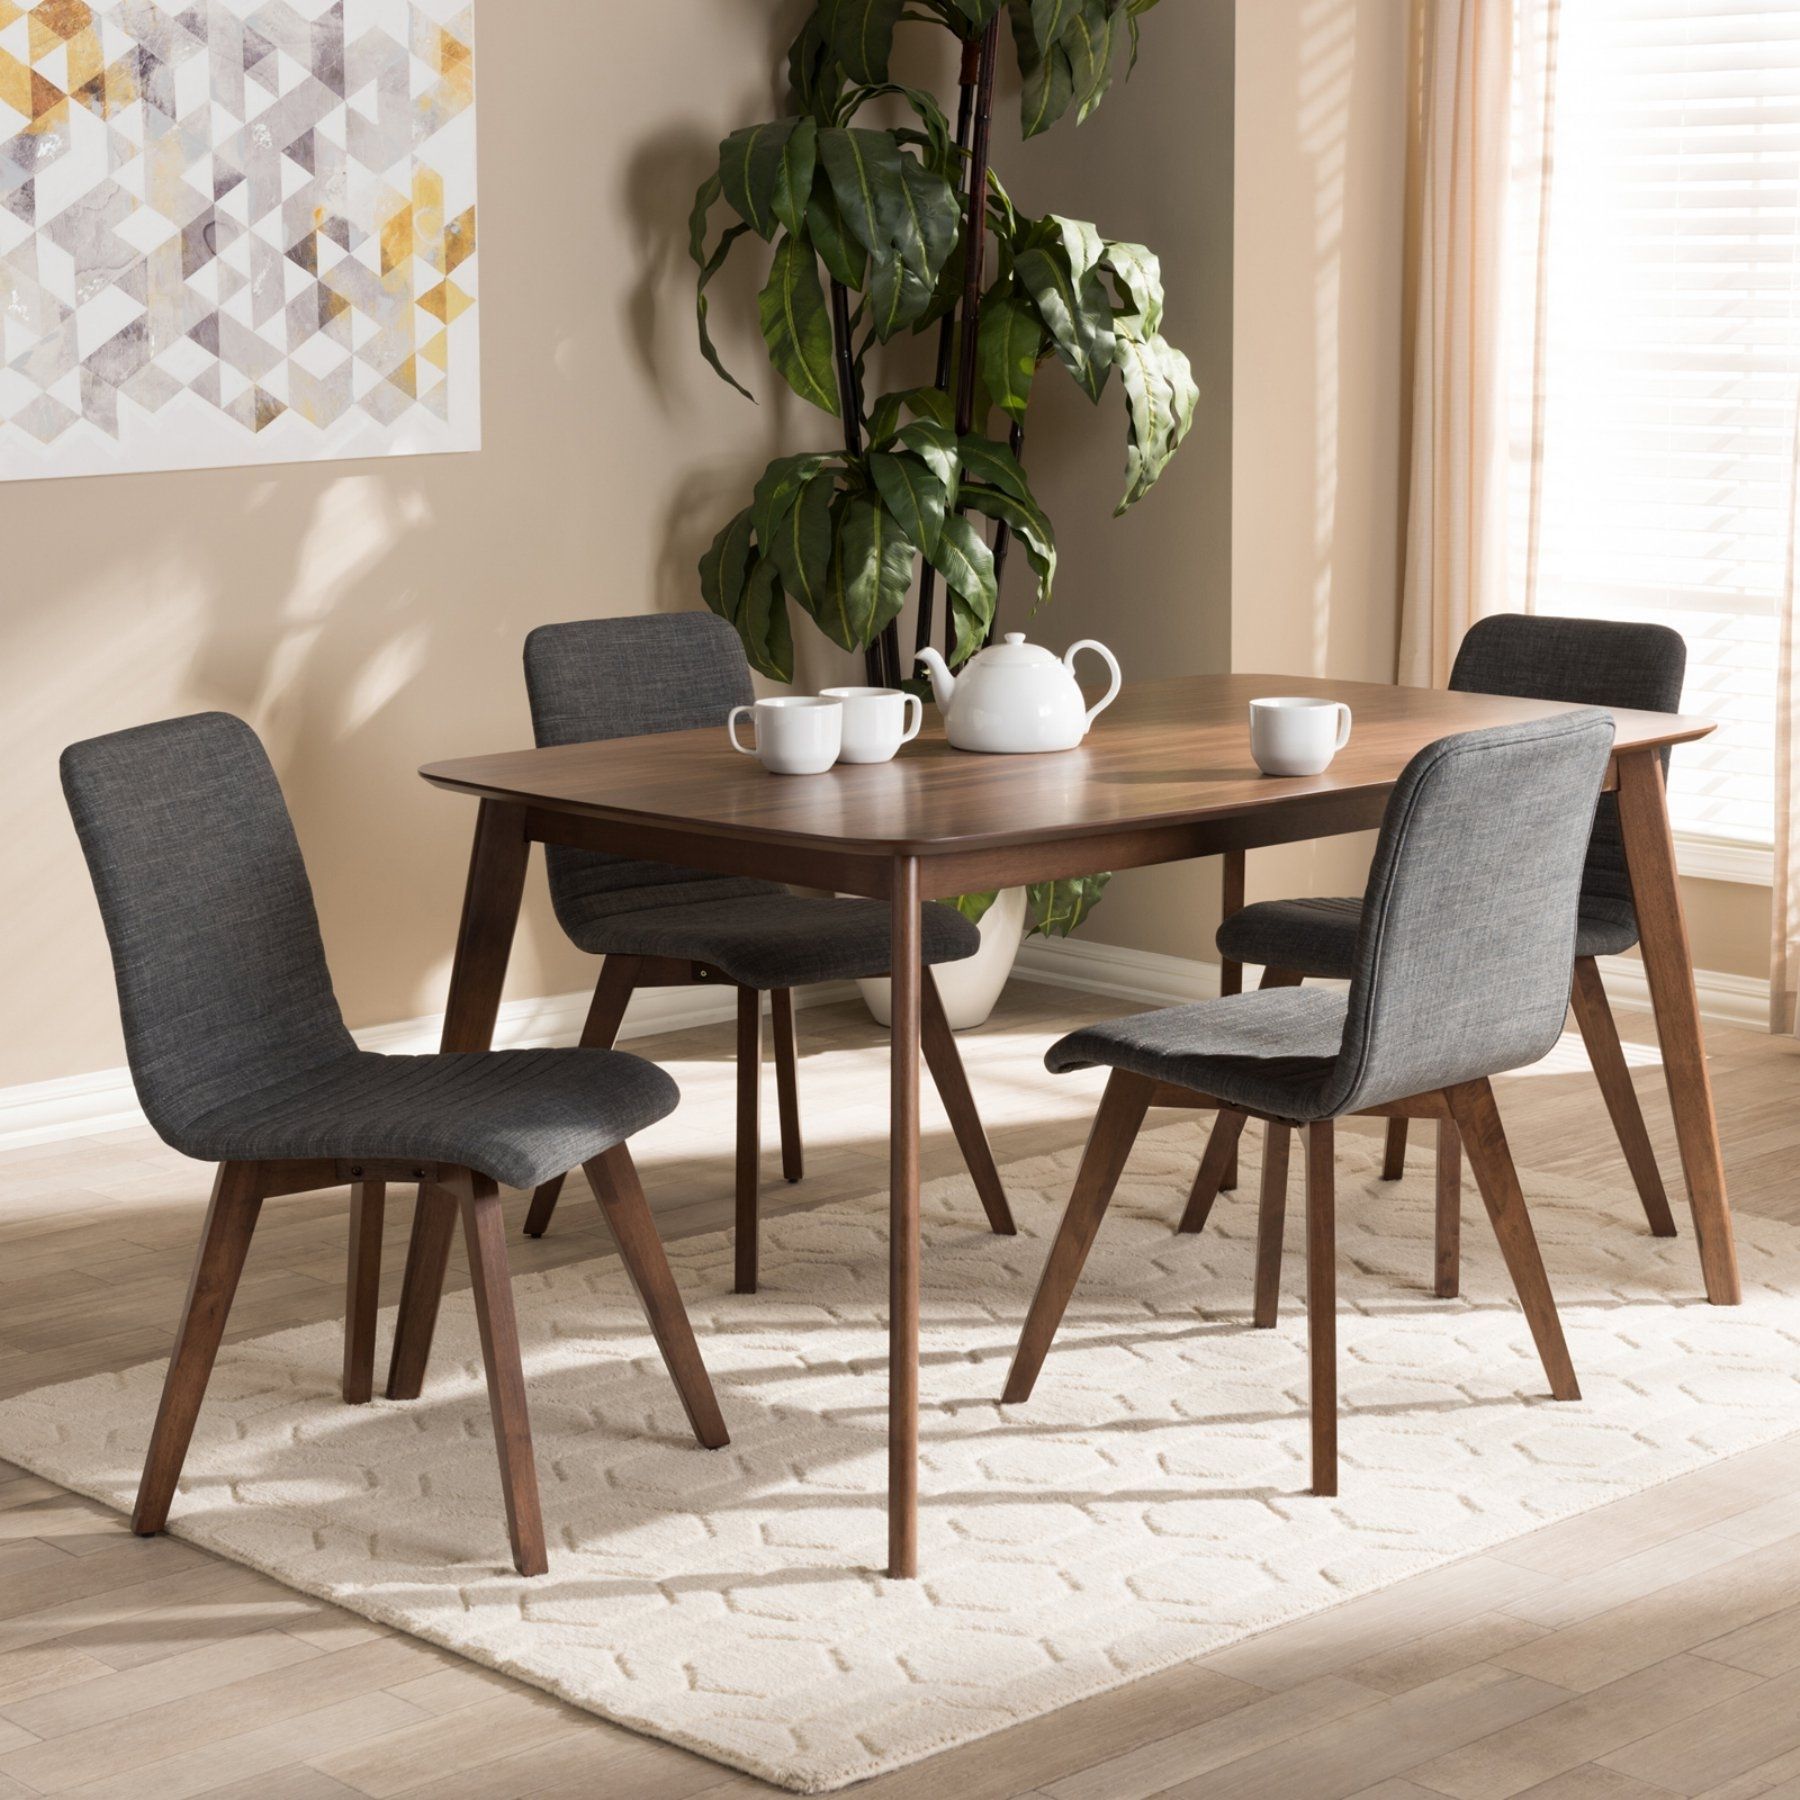 Baxton Studio Sugar Mid Century Modern Fabric Upholstered 5 Piece In Most Recently Released Craftsman 5 Piece Round Dining Sets With Uph Side Chairs (View 17 of 20)